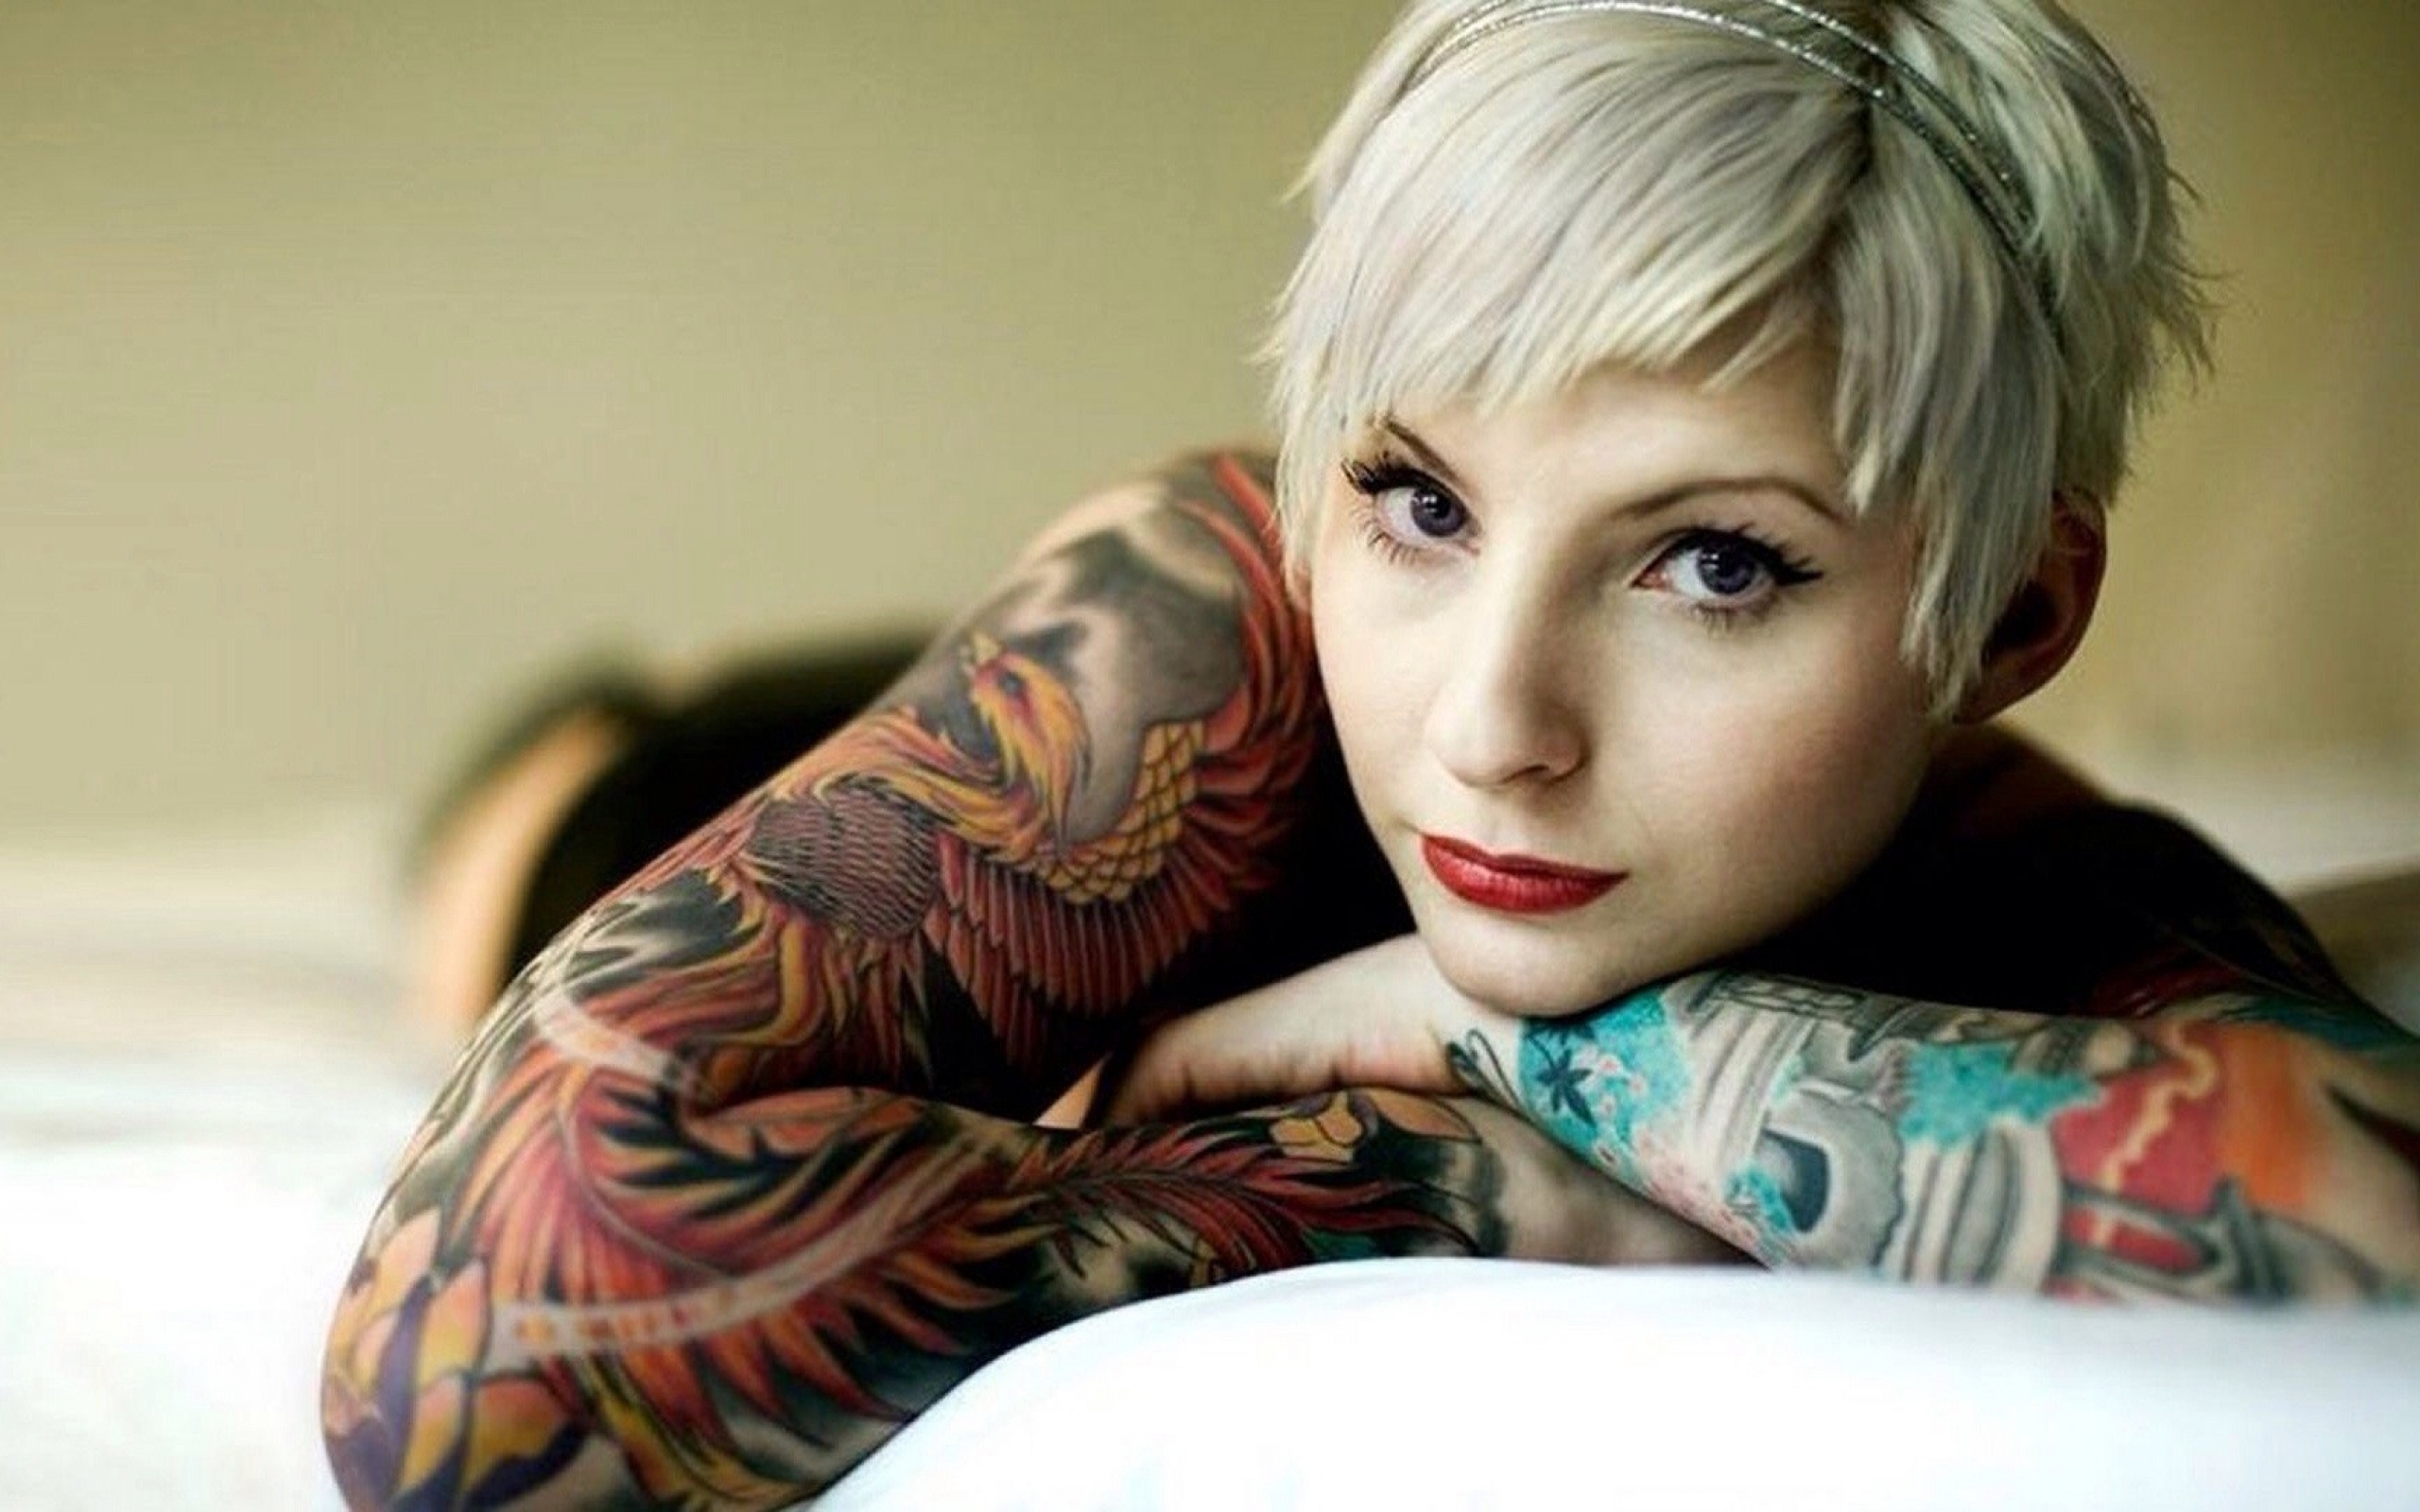 Download Wallpapers, Download 2560x1600 blondes tattoos women ...